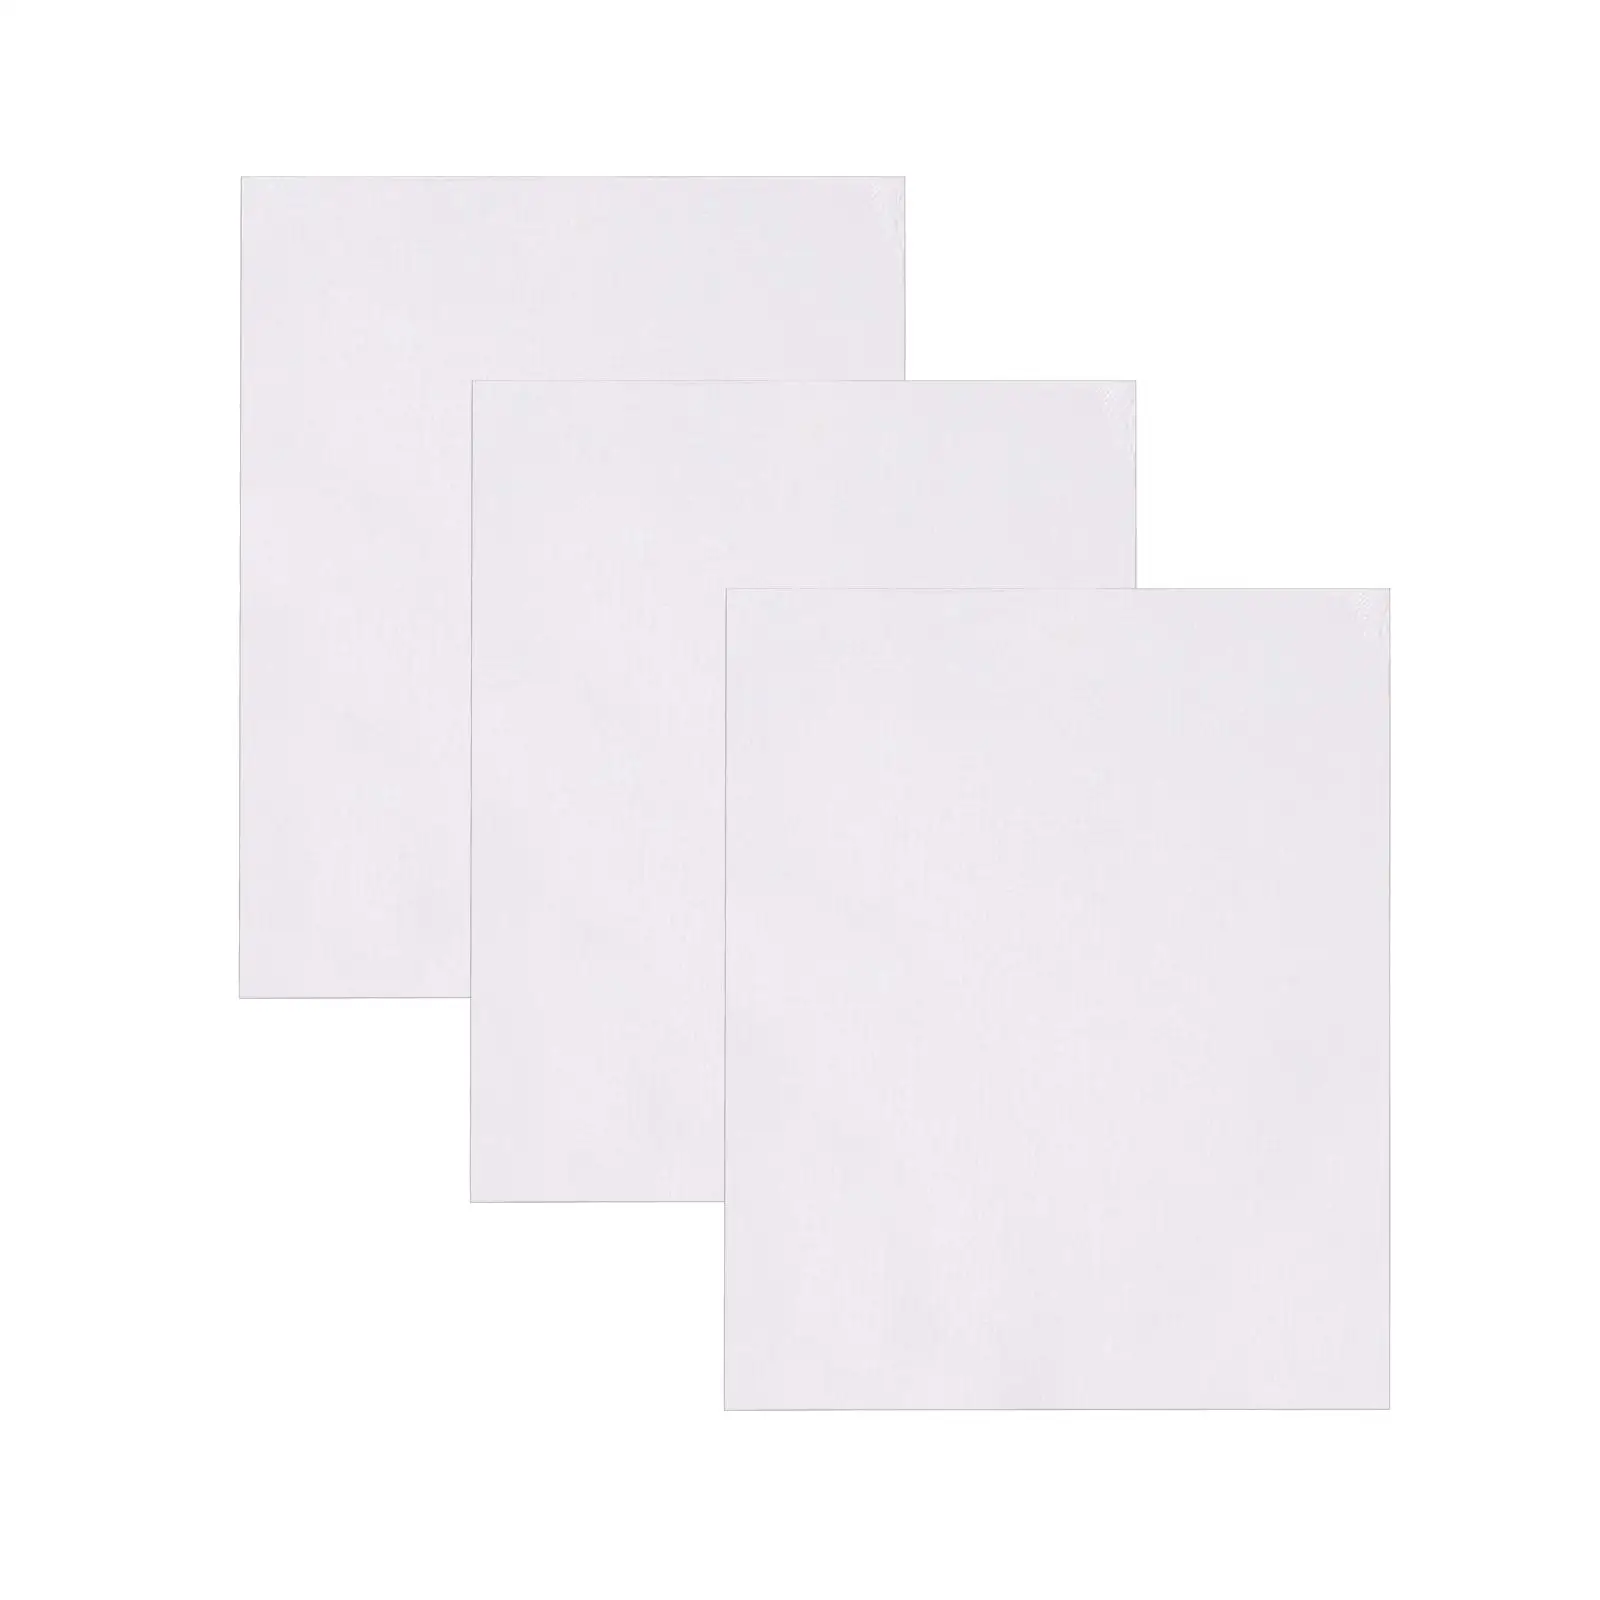 3x Cotton Artist Blank Canvas Boards Acrylic Oil Painting Artist Boards DIY Art Supplies Canvas Panels for Students Beginners